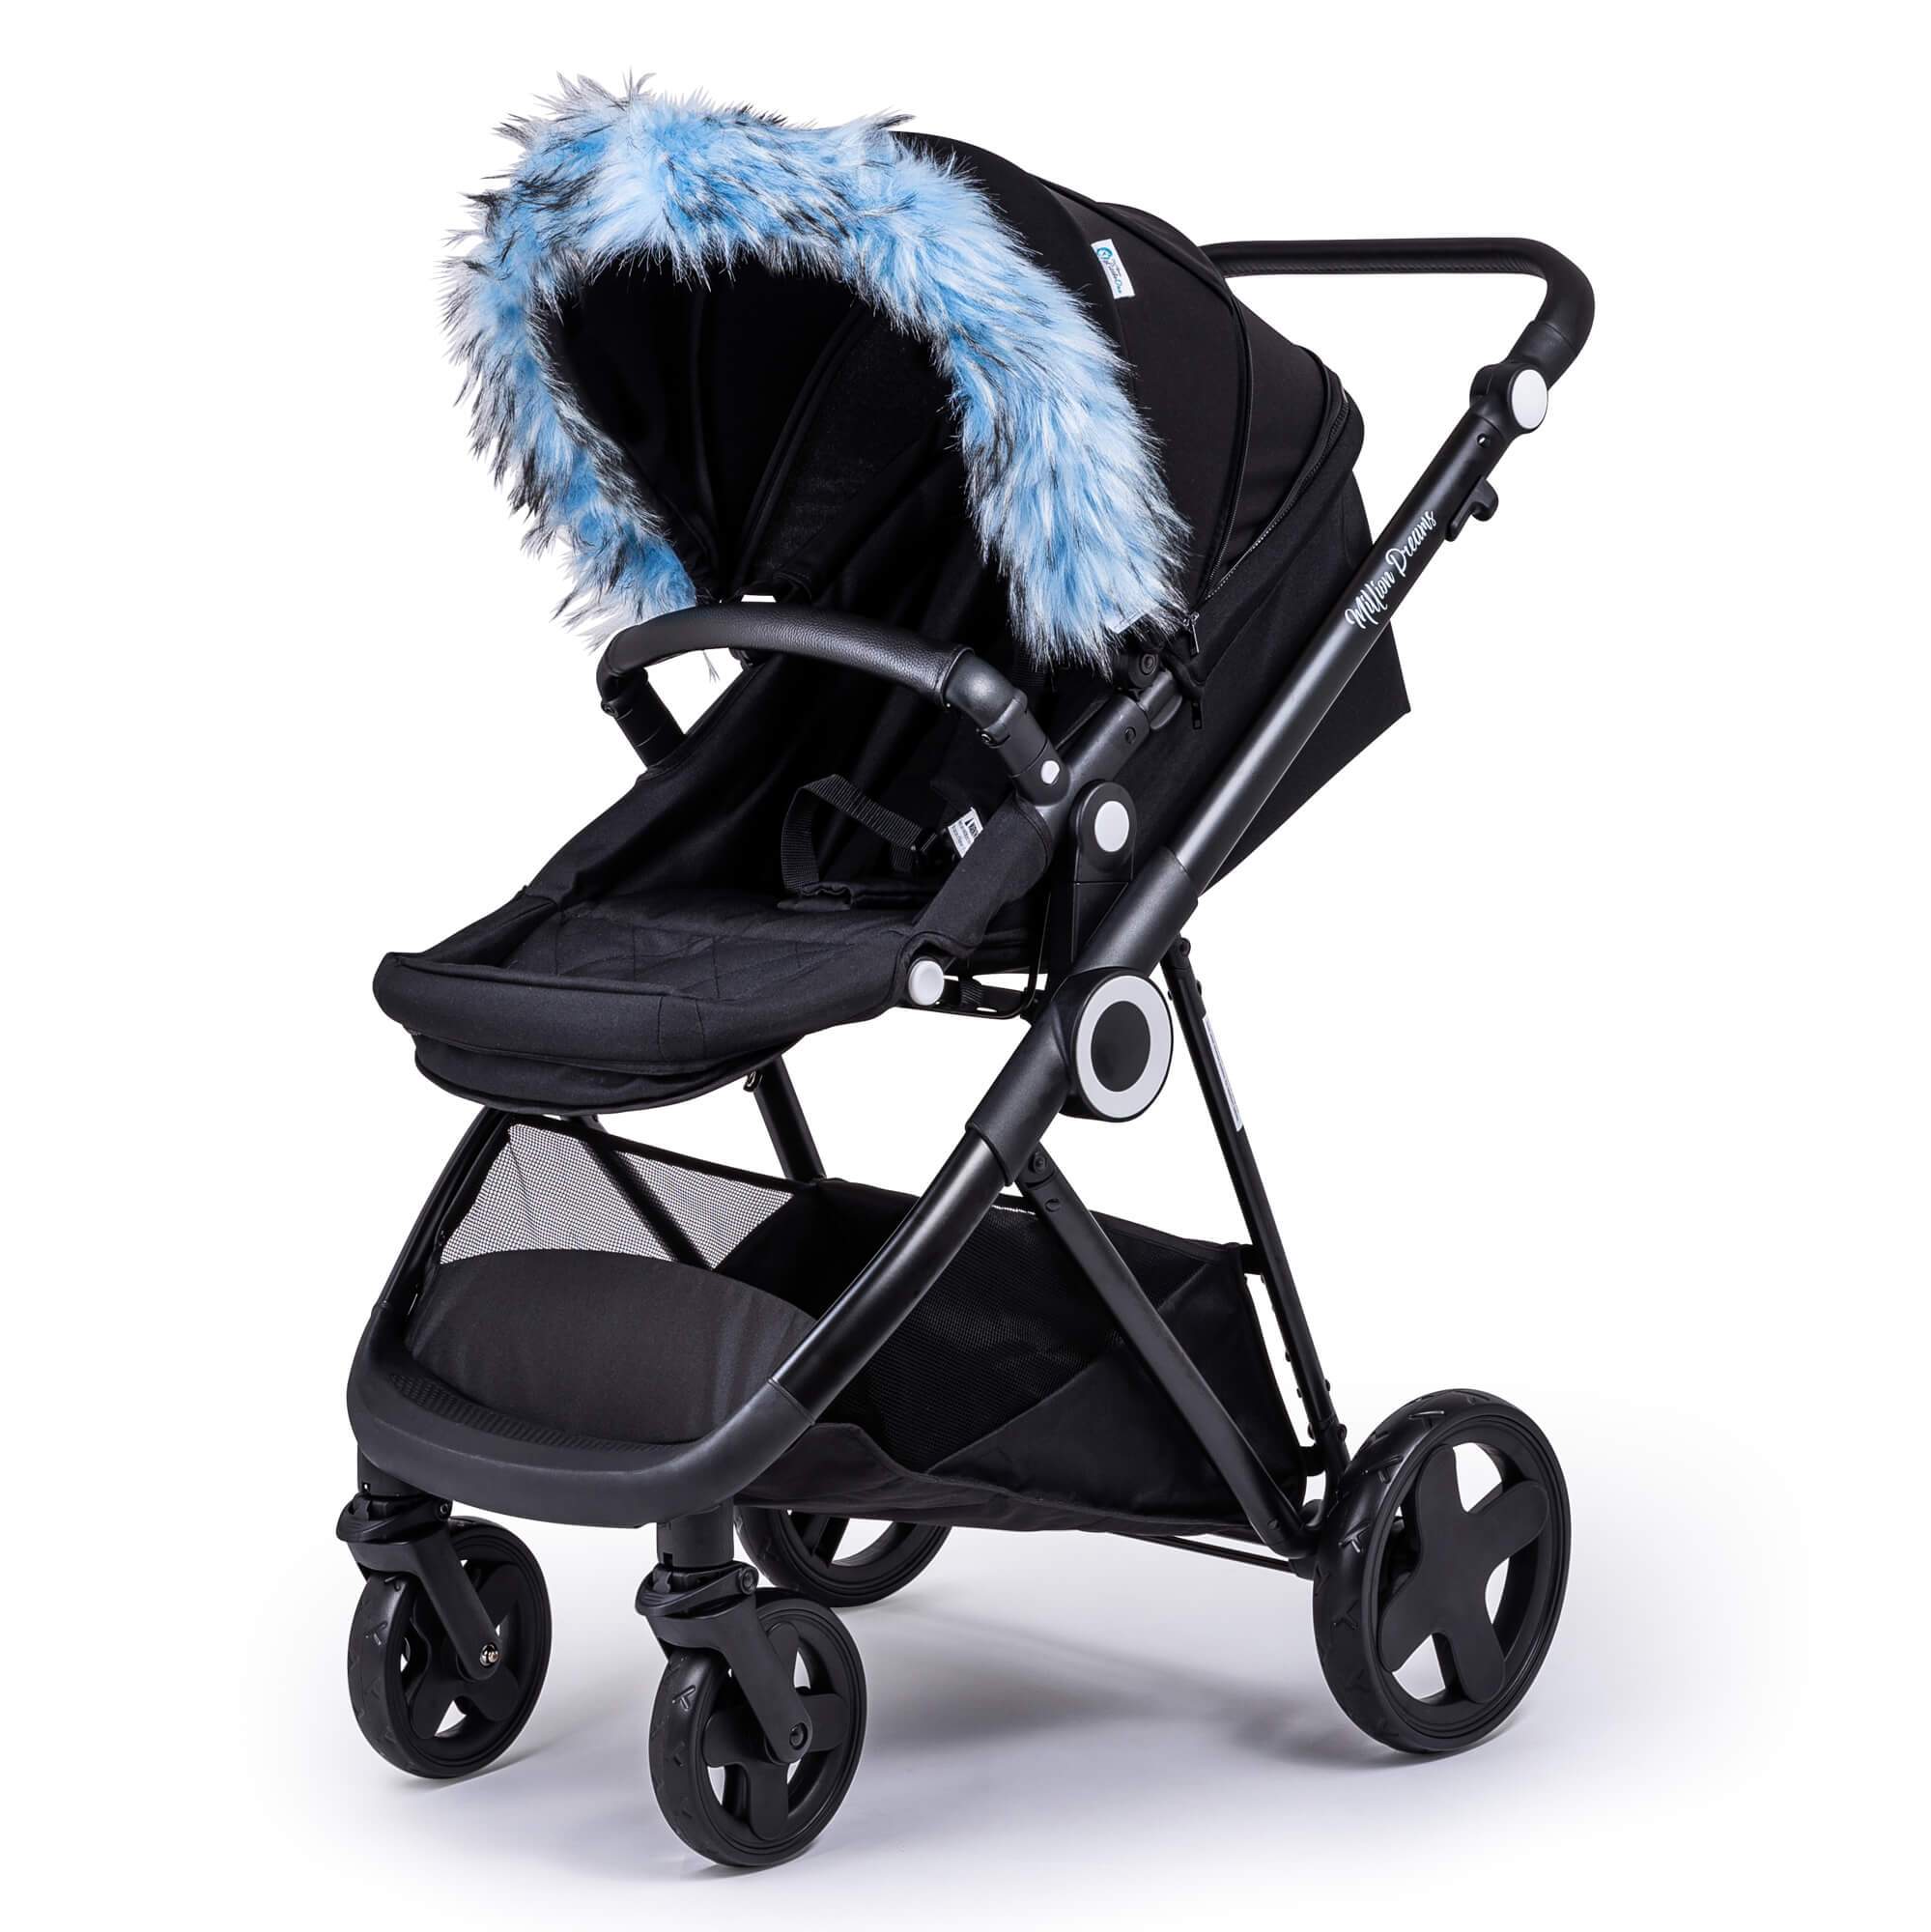 Pram Fur Hood Trim Attachment for Pushchair Compatible with Stokke - Light Blue / Fits All Models | For Your Little One